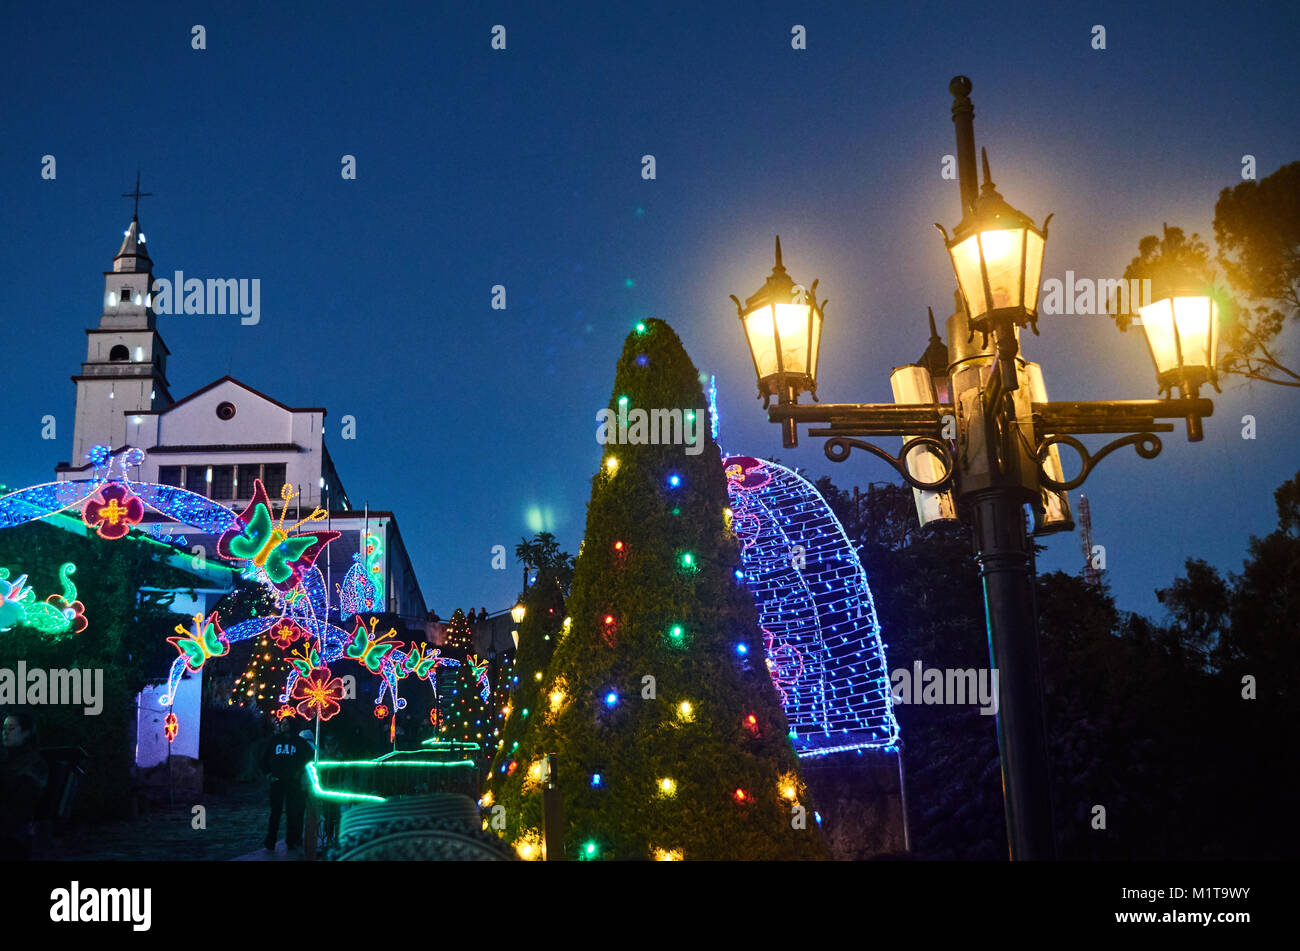 BOGOTA, COLOMBIA - JANURAY 6, 2015: Some Christmas decoration at the top of the hill Monserrate, with its church in the background. Stock Photo